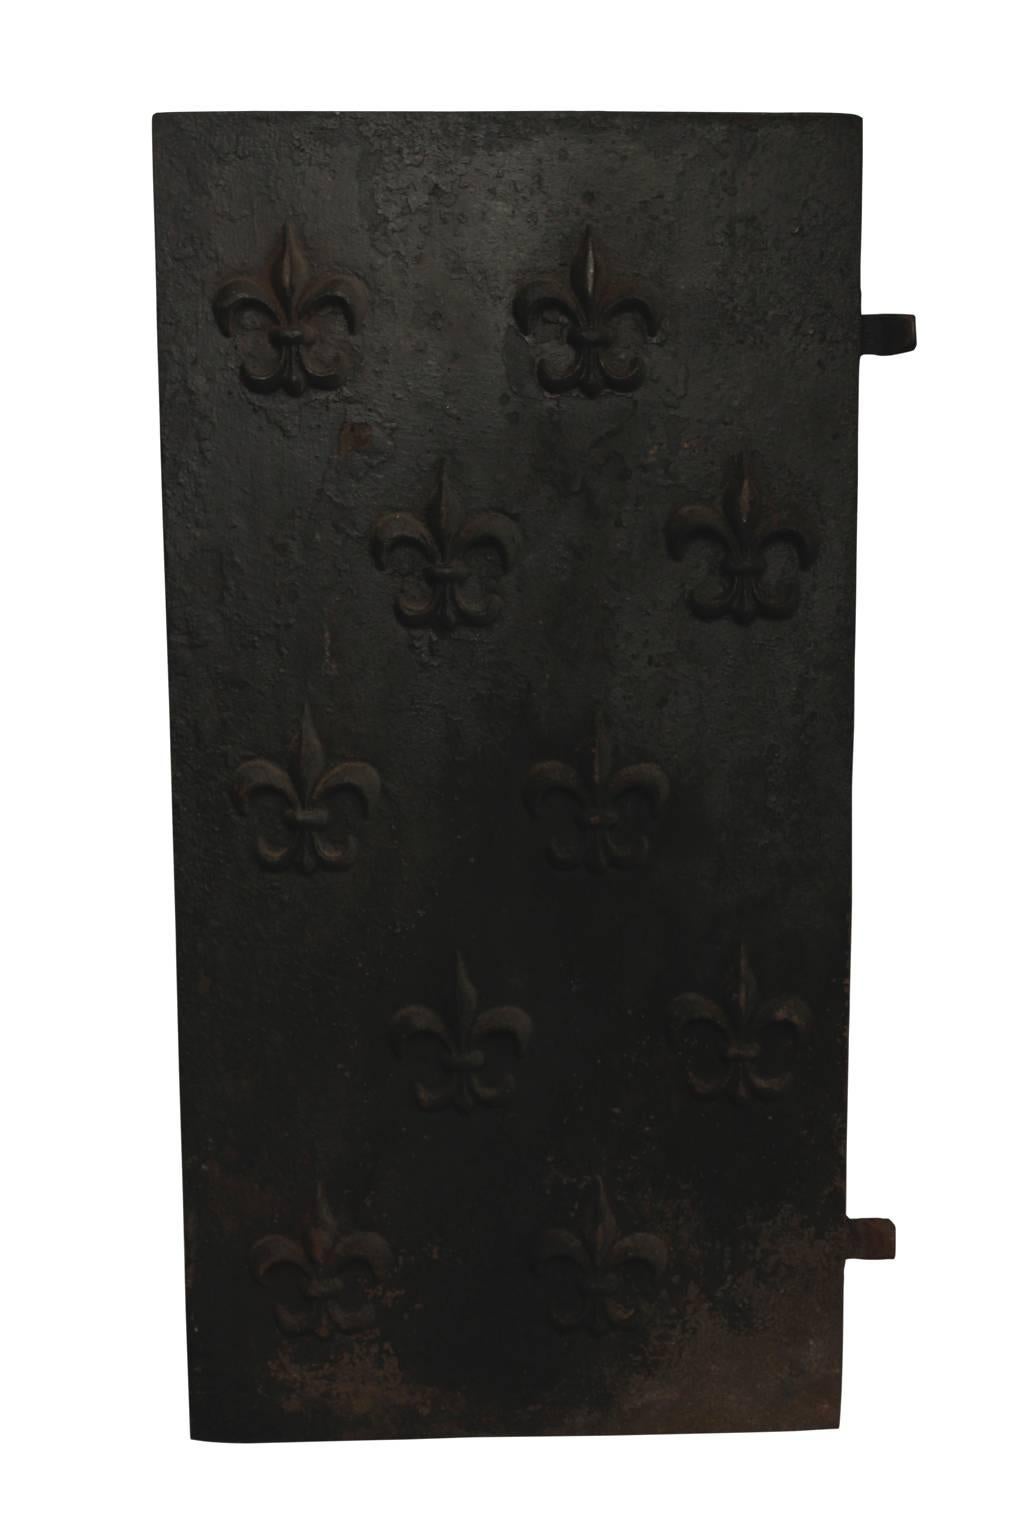 Cast Iron Fleur De Lis Fireplace Liner, 19th Century In Distressed Condition For Sale In New York, NY